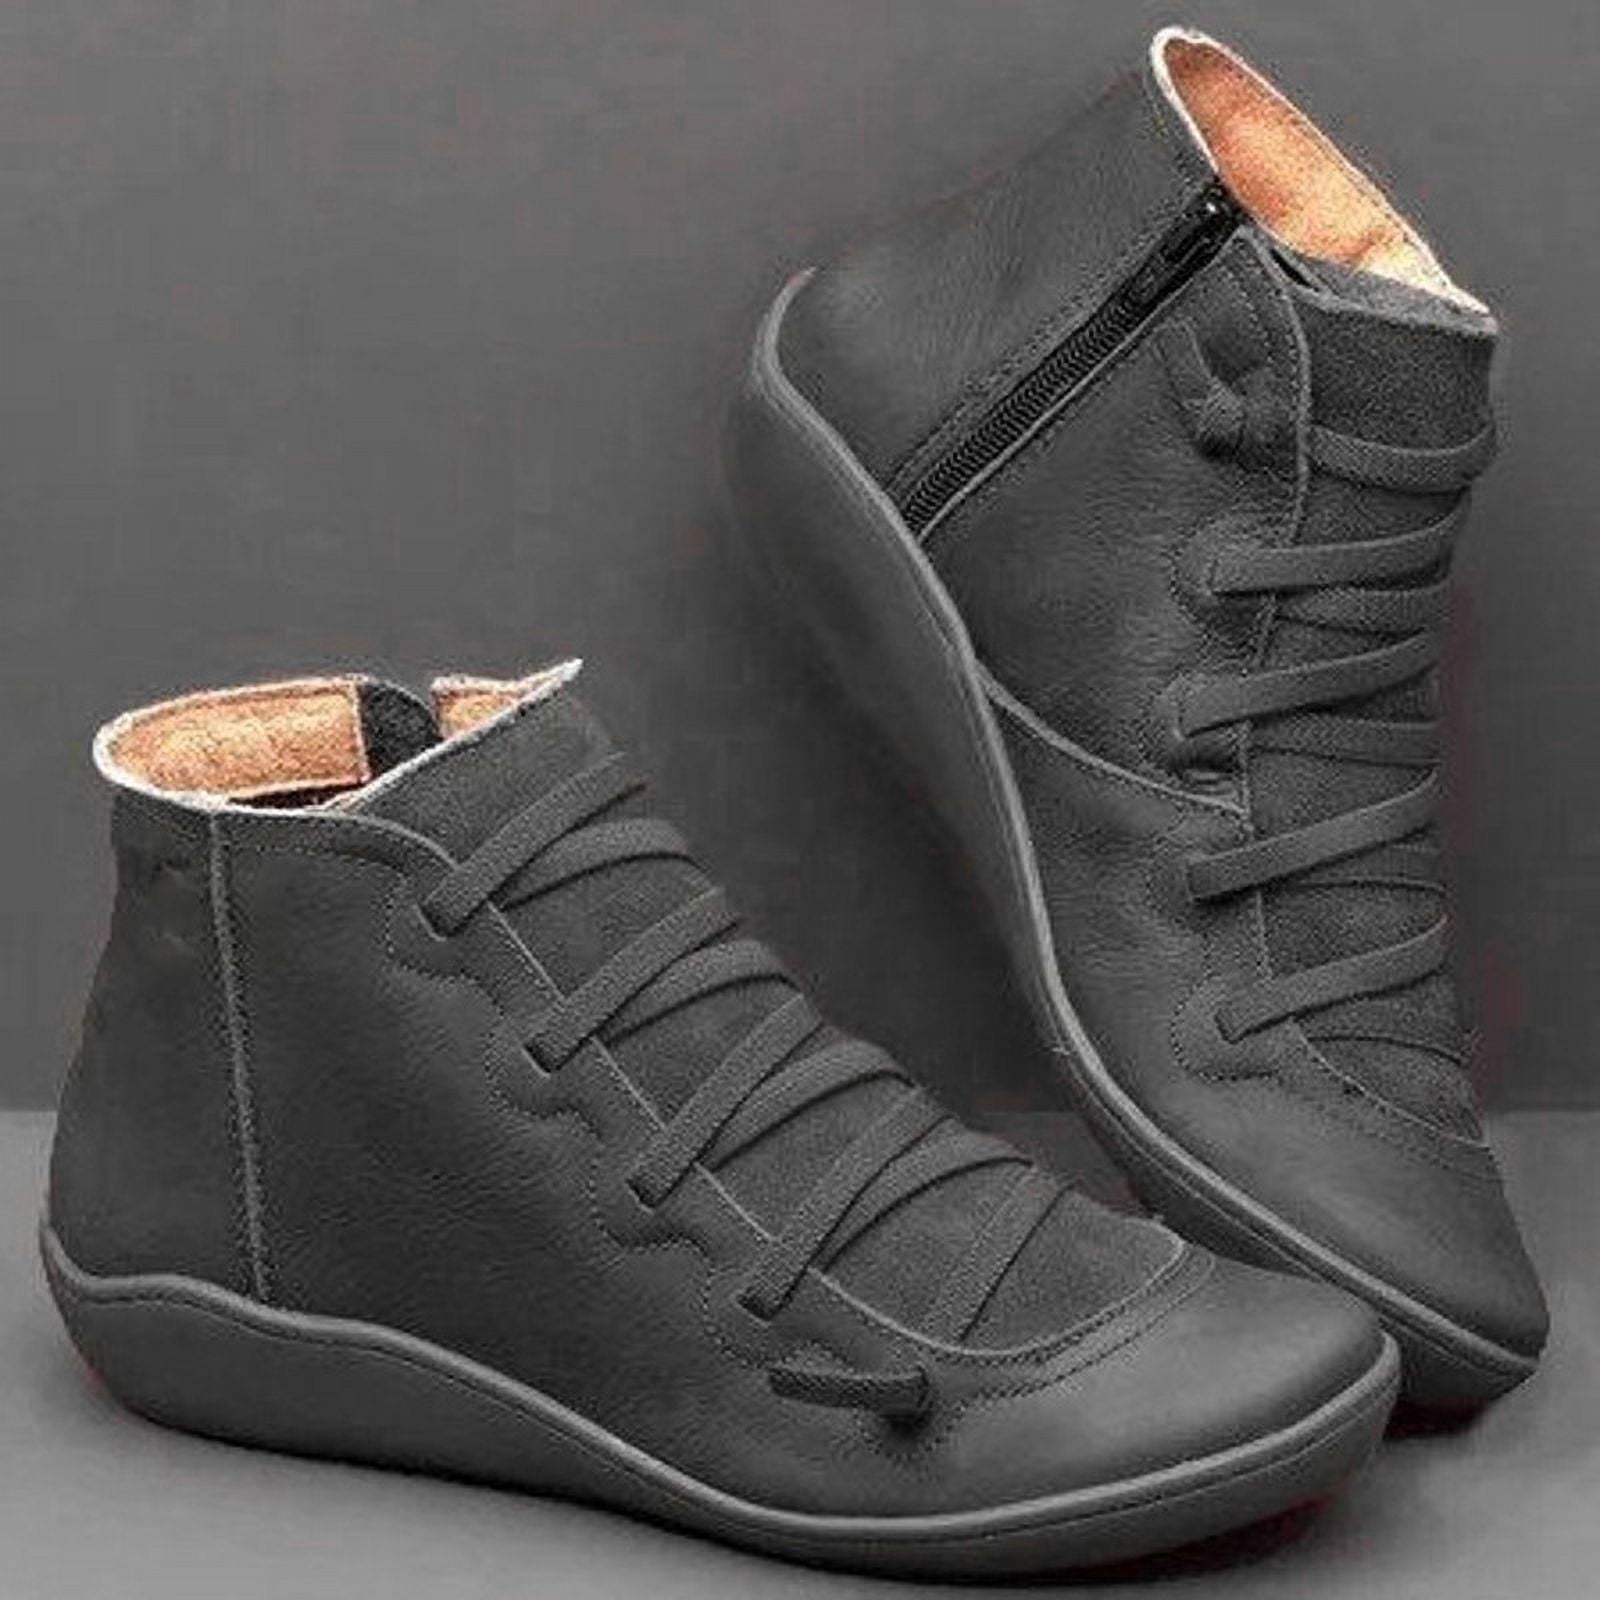 Ankle Boots for Women Arch Support Womens Low Heel Lace Up Zipper ...